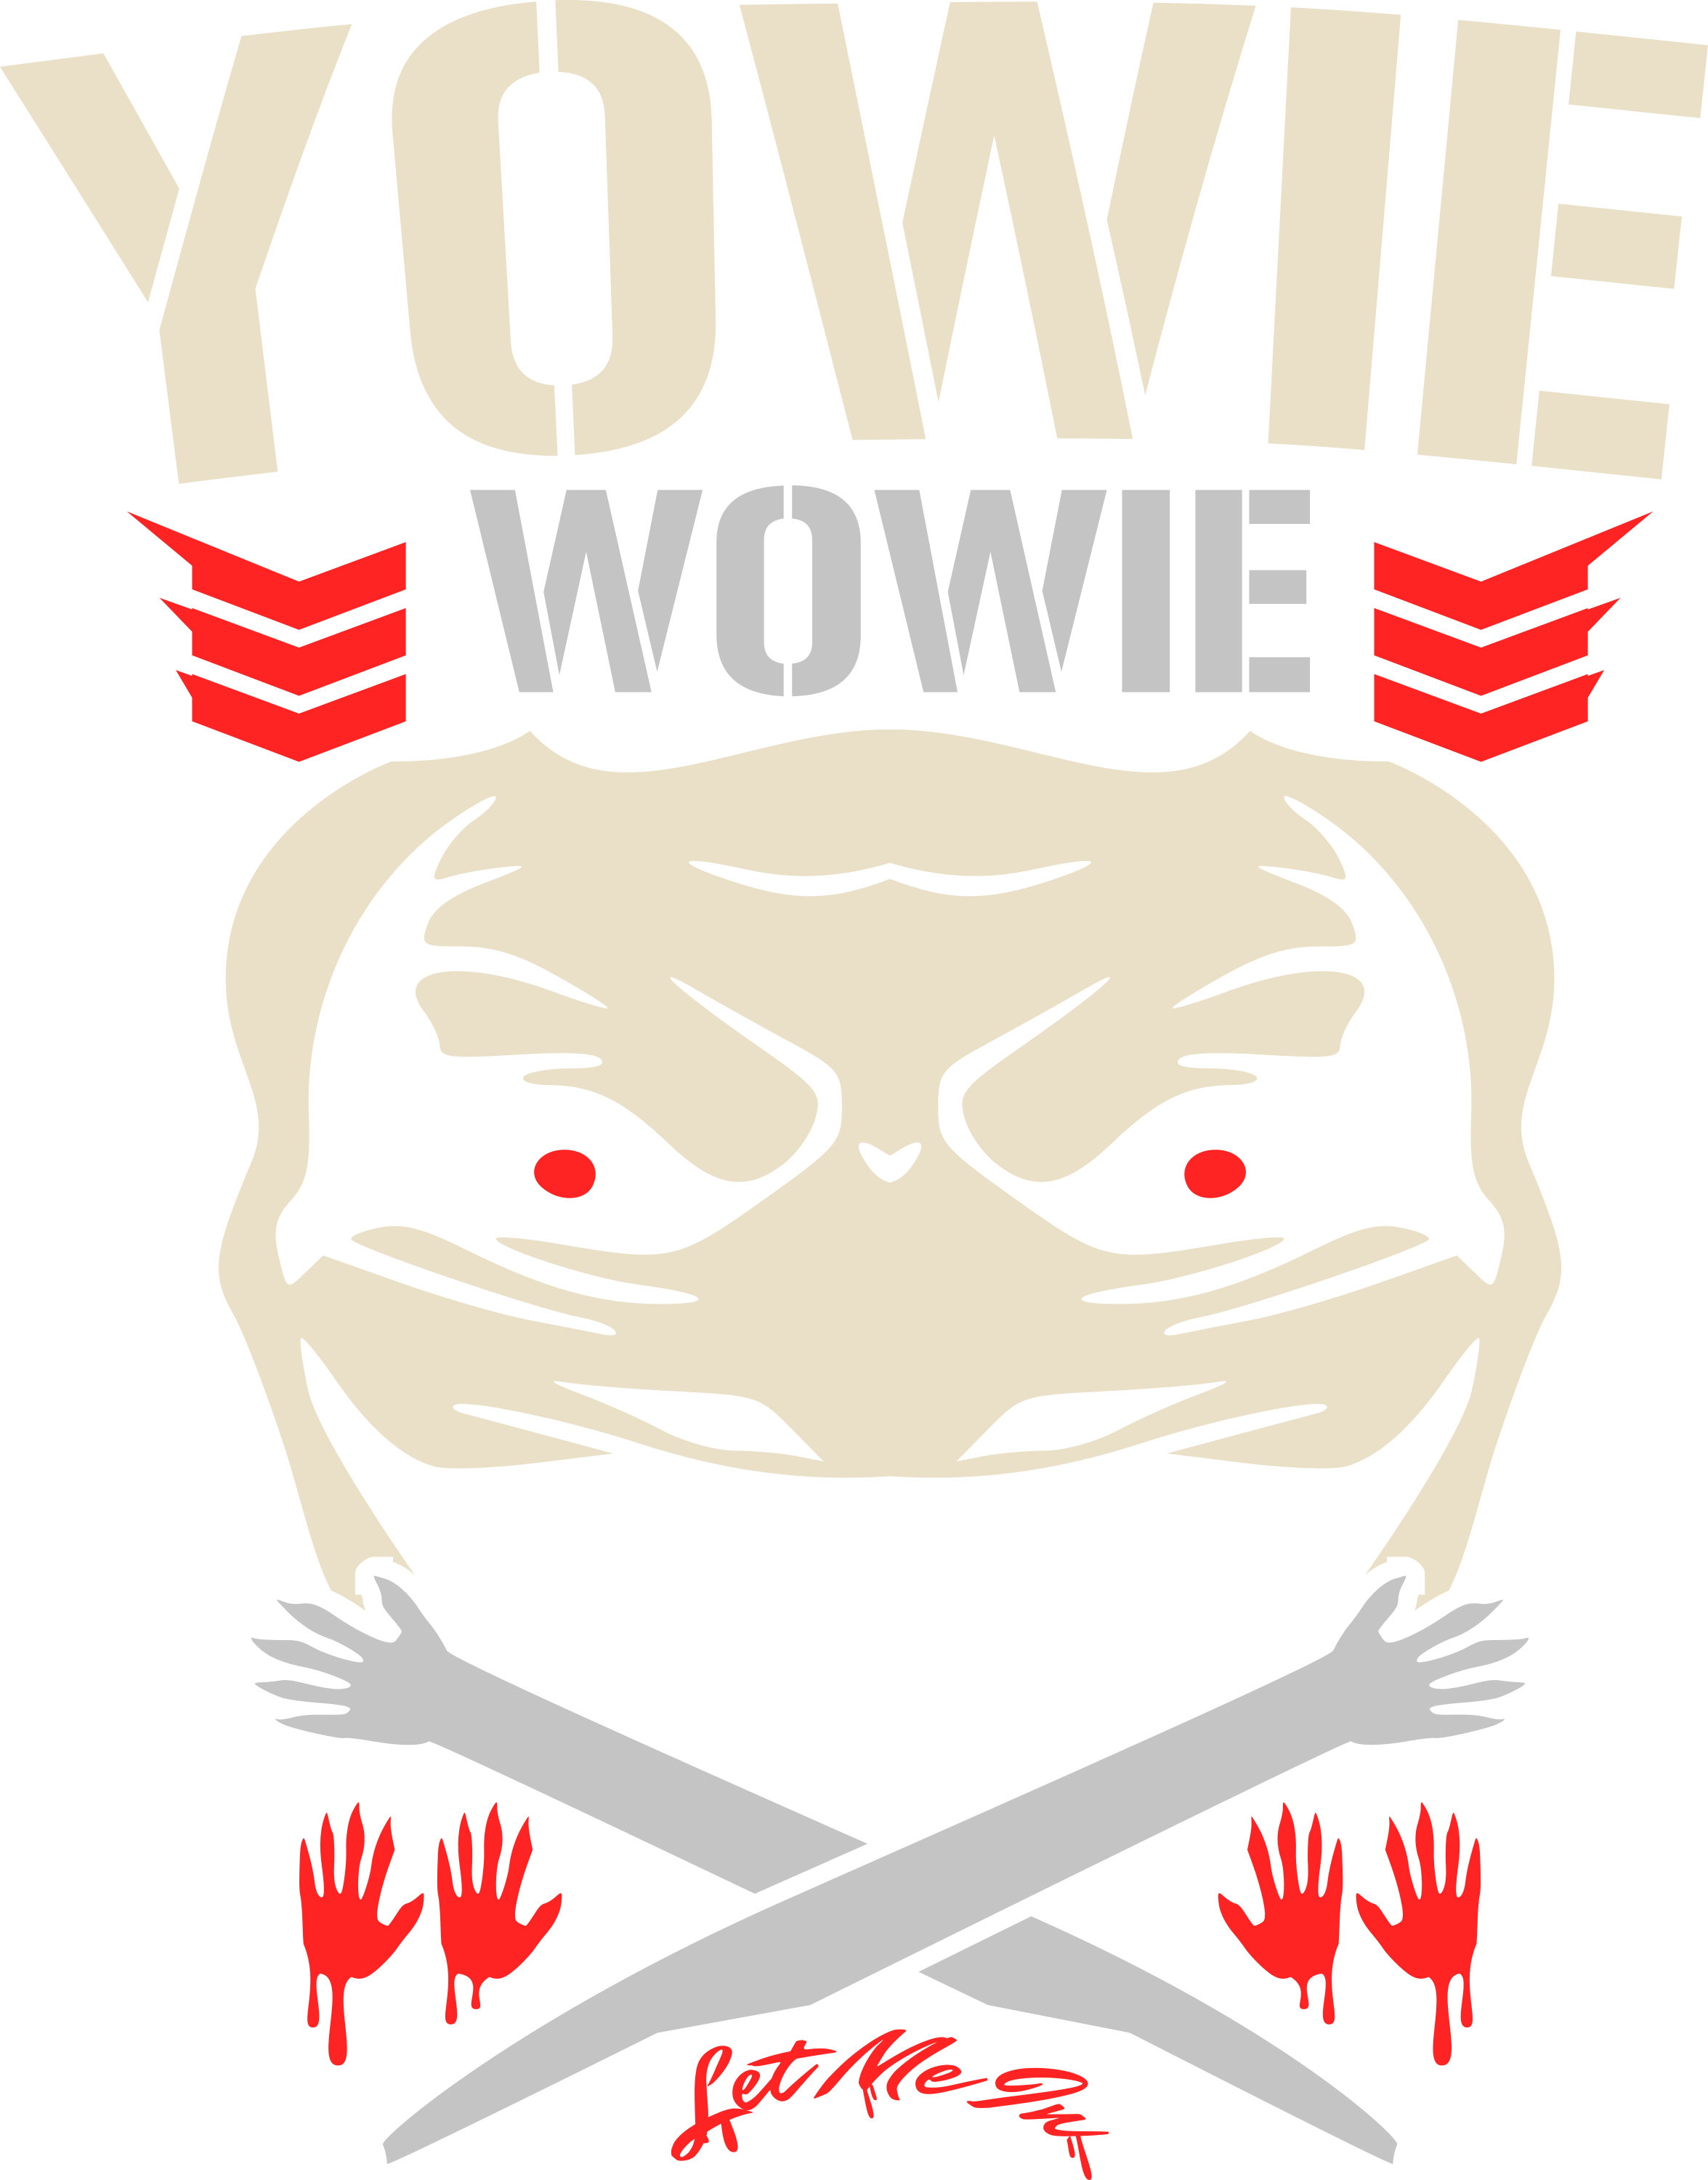 Yowie Wowie (Bullet Club Colored) Logo by DarkVoidPictures on